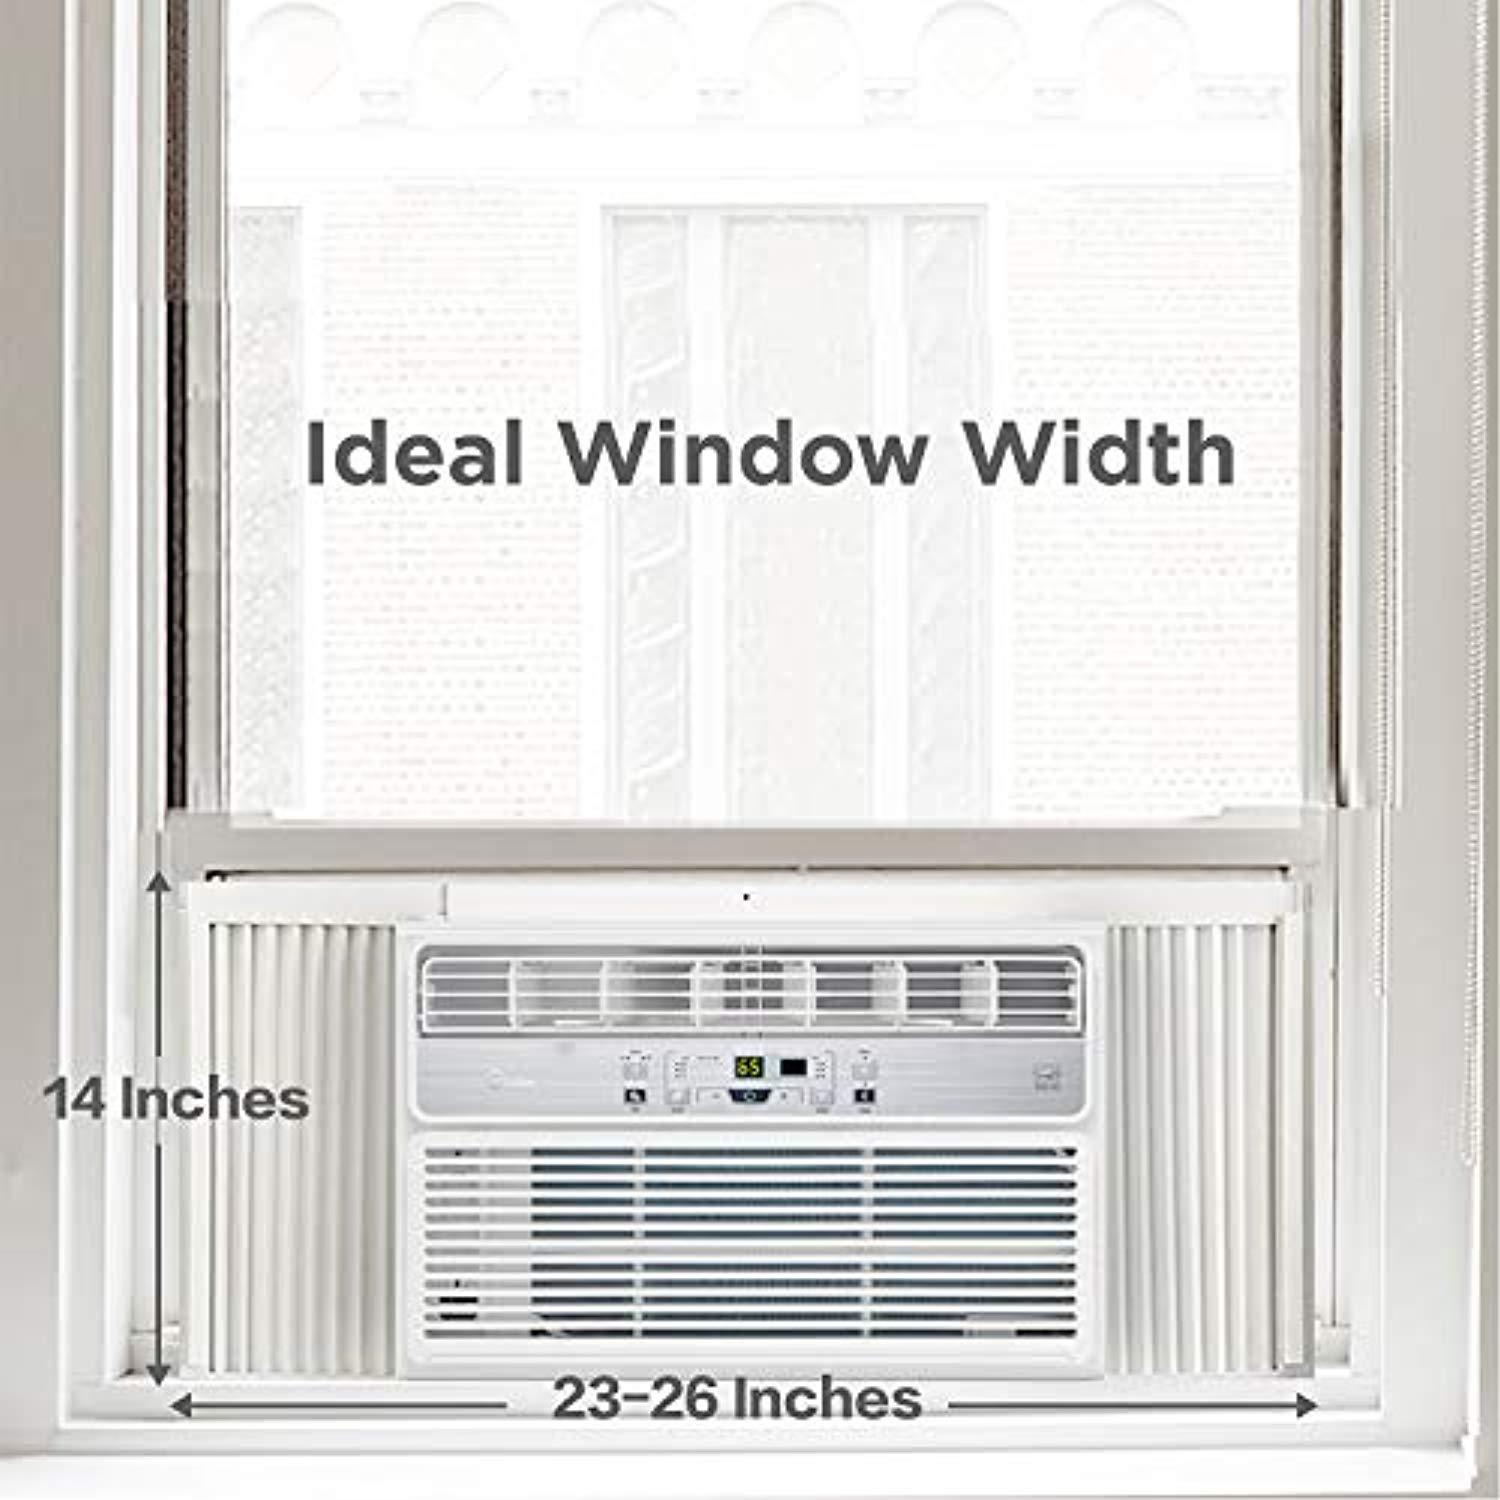 Midea 6,000 BTU EasyCool Window Air Conditioner, Dehumidifier and Fan -  Cool, Circulate and Dehumidify up to 250 Sq. Ft., Reusable Filter, Remote